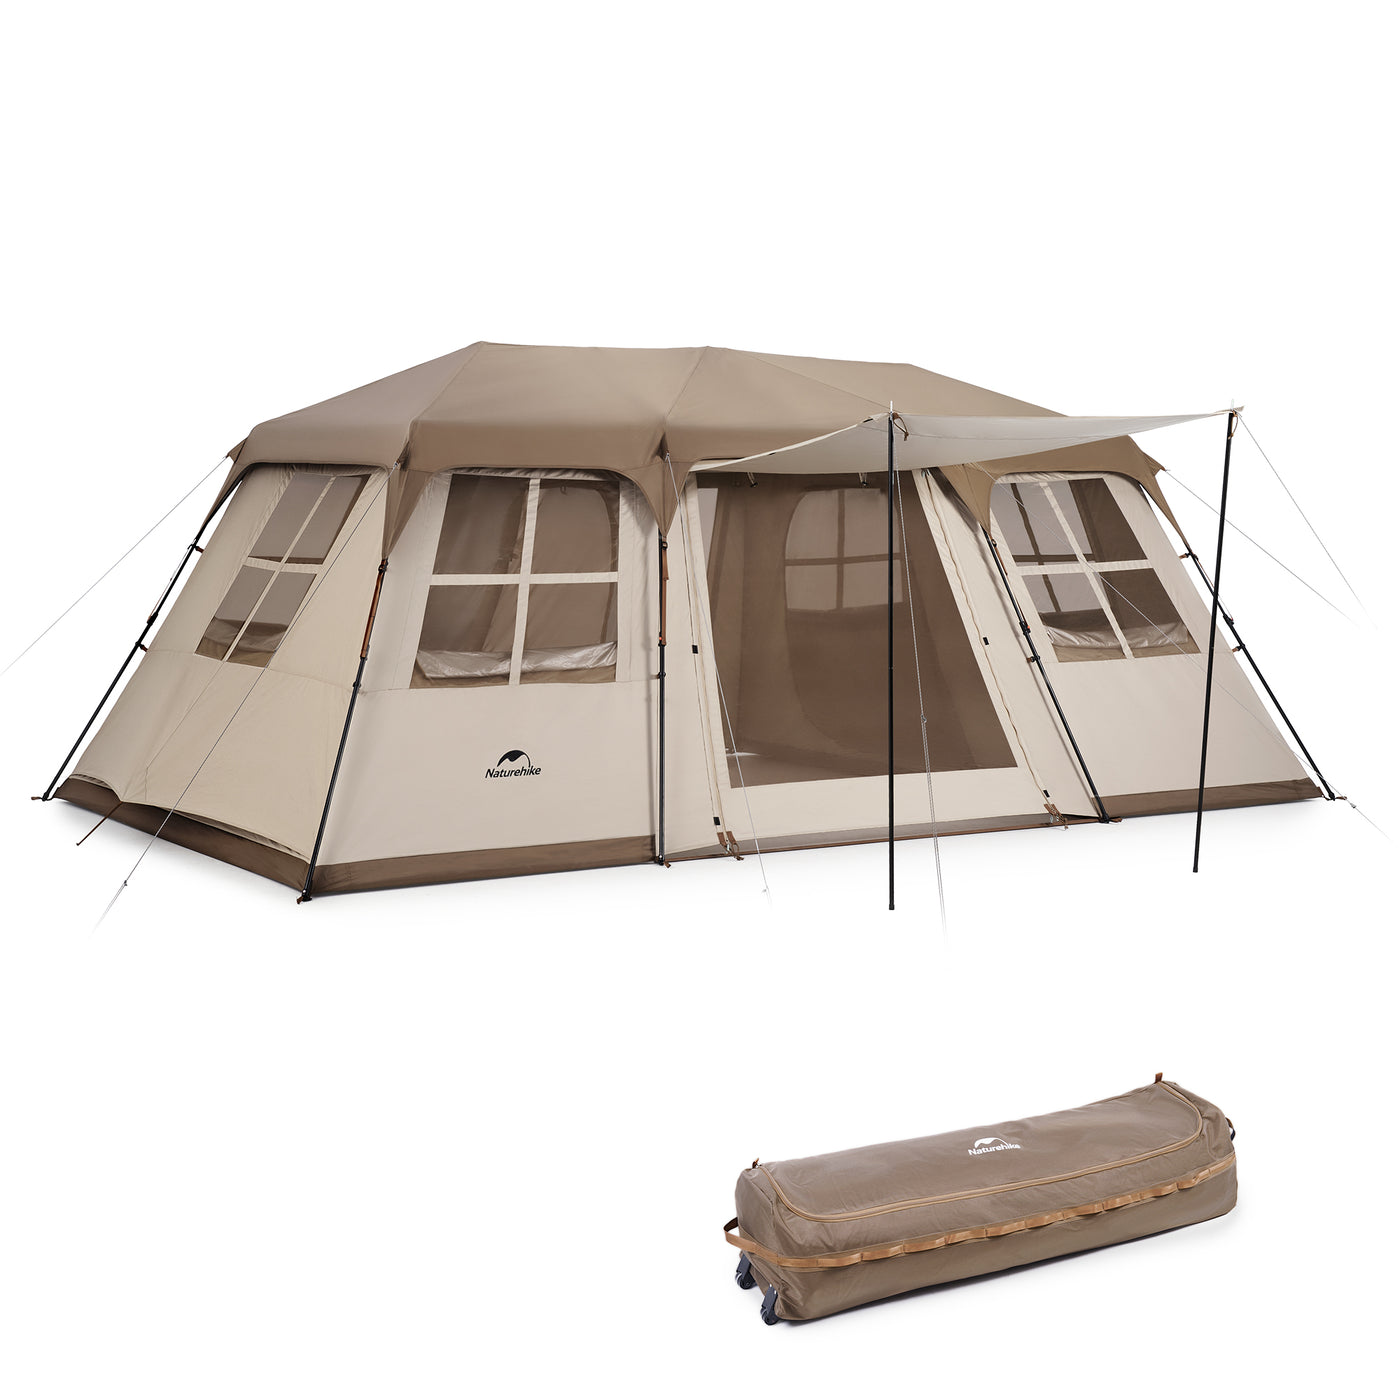 An image of a Village 17-Roof Automatic Tent Two-Room&One-Hall by Naturehike official store